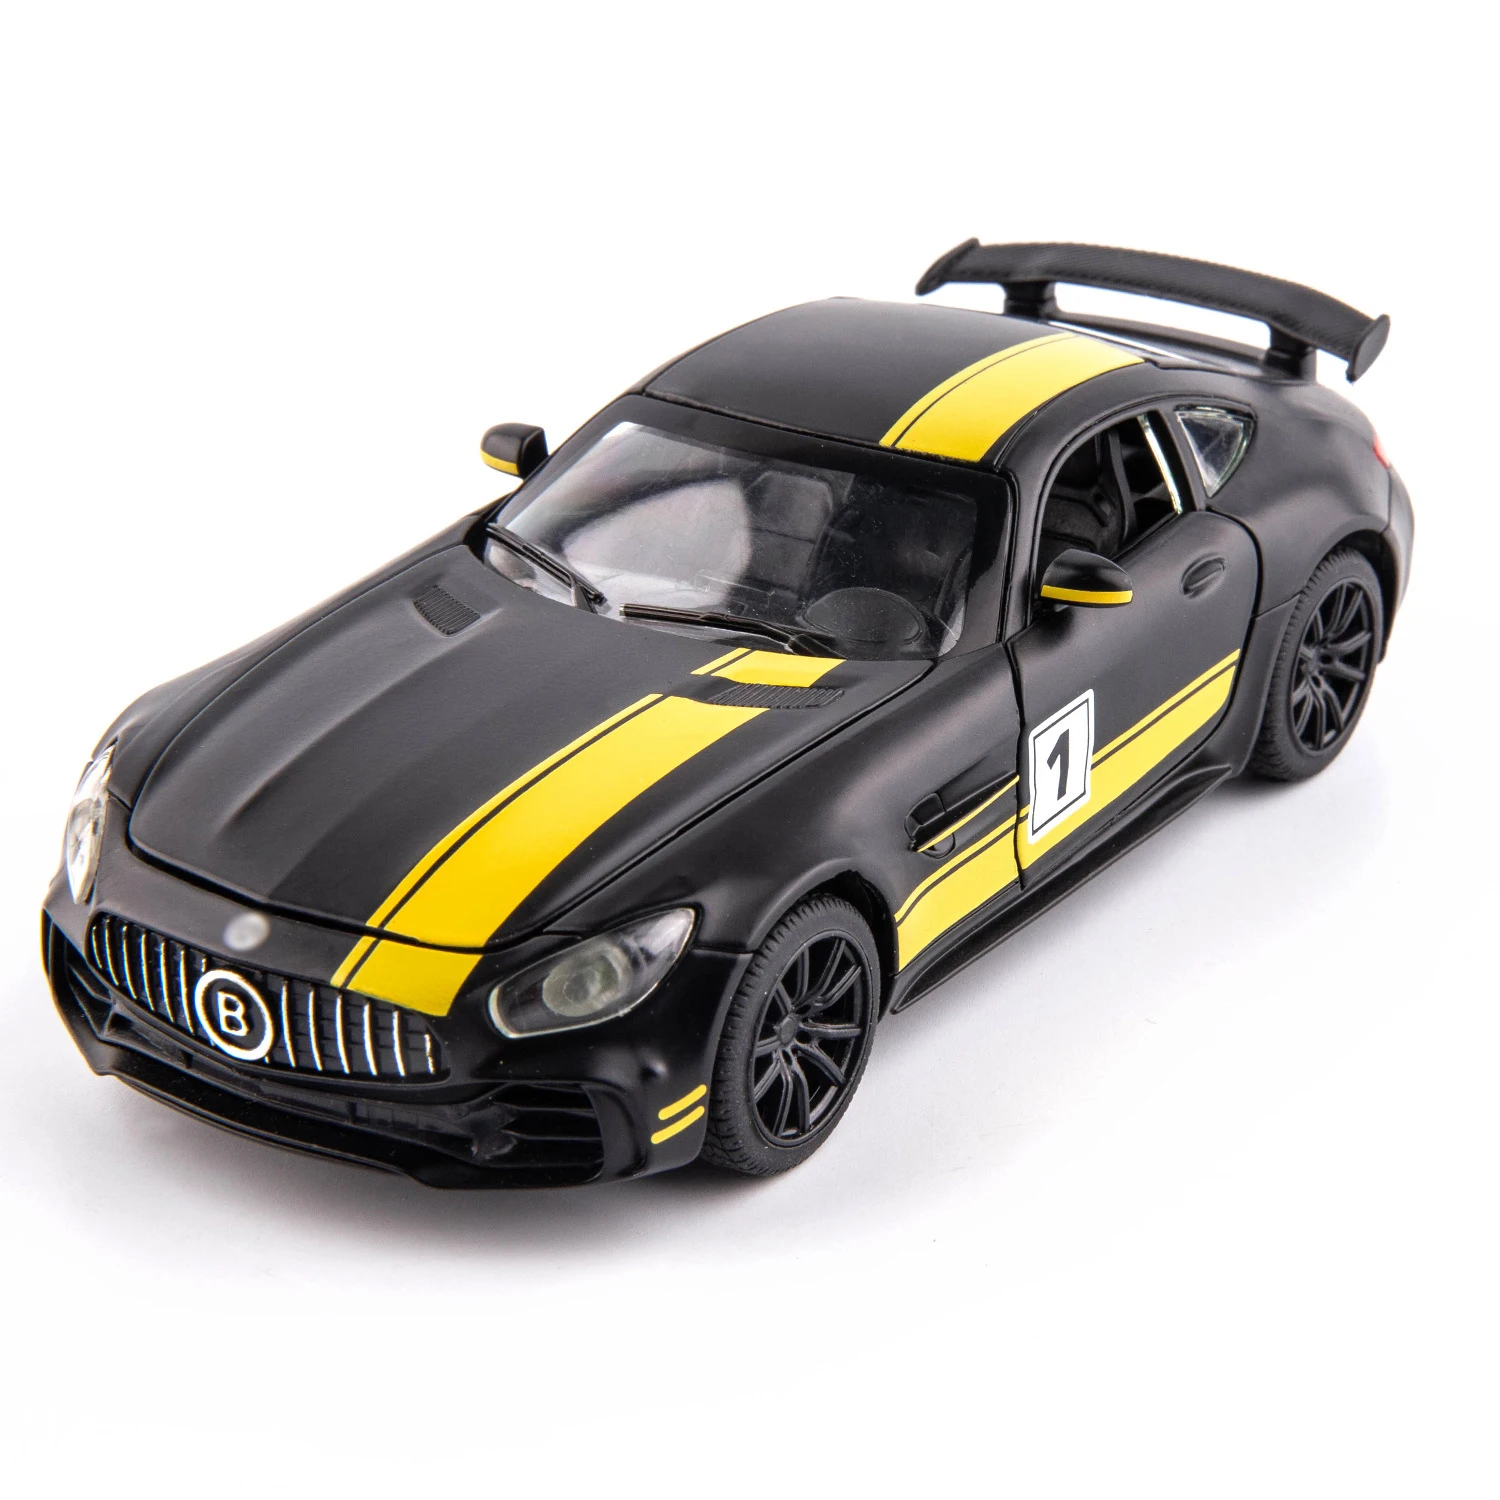 die cast toy cars 1:24 Scale Hongqi H9 Glow Alloy Car Model Diecast Metal Kids Toys Vehicles Sports Car Racing Model Replica Decor Gift for Boys lego car sets